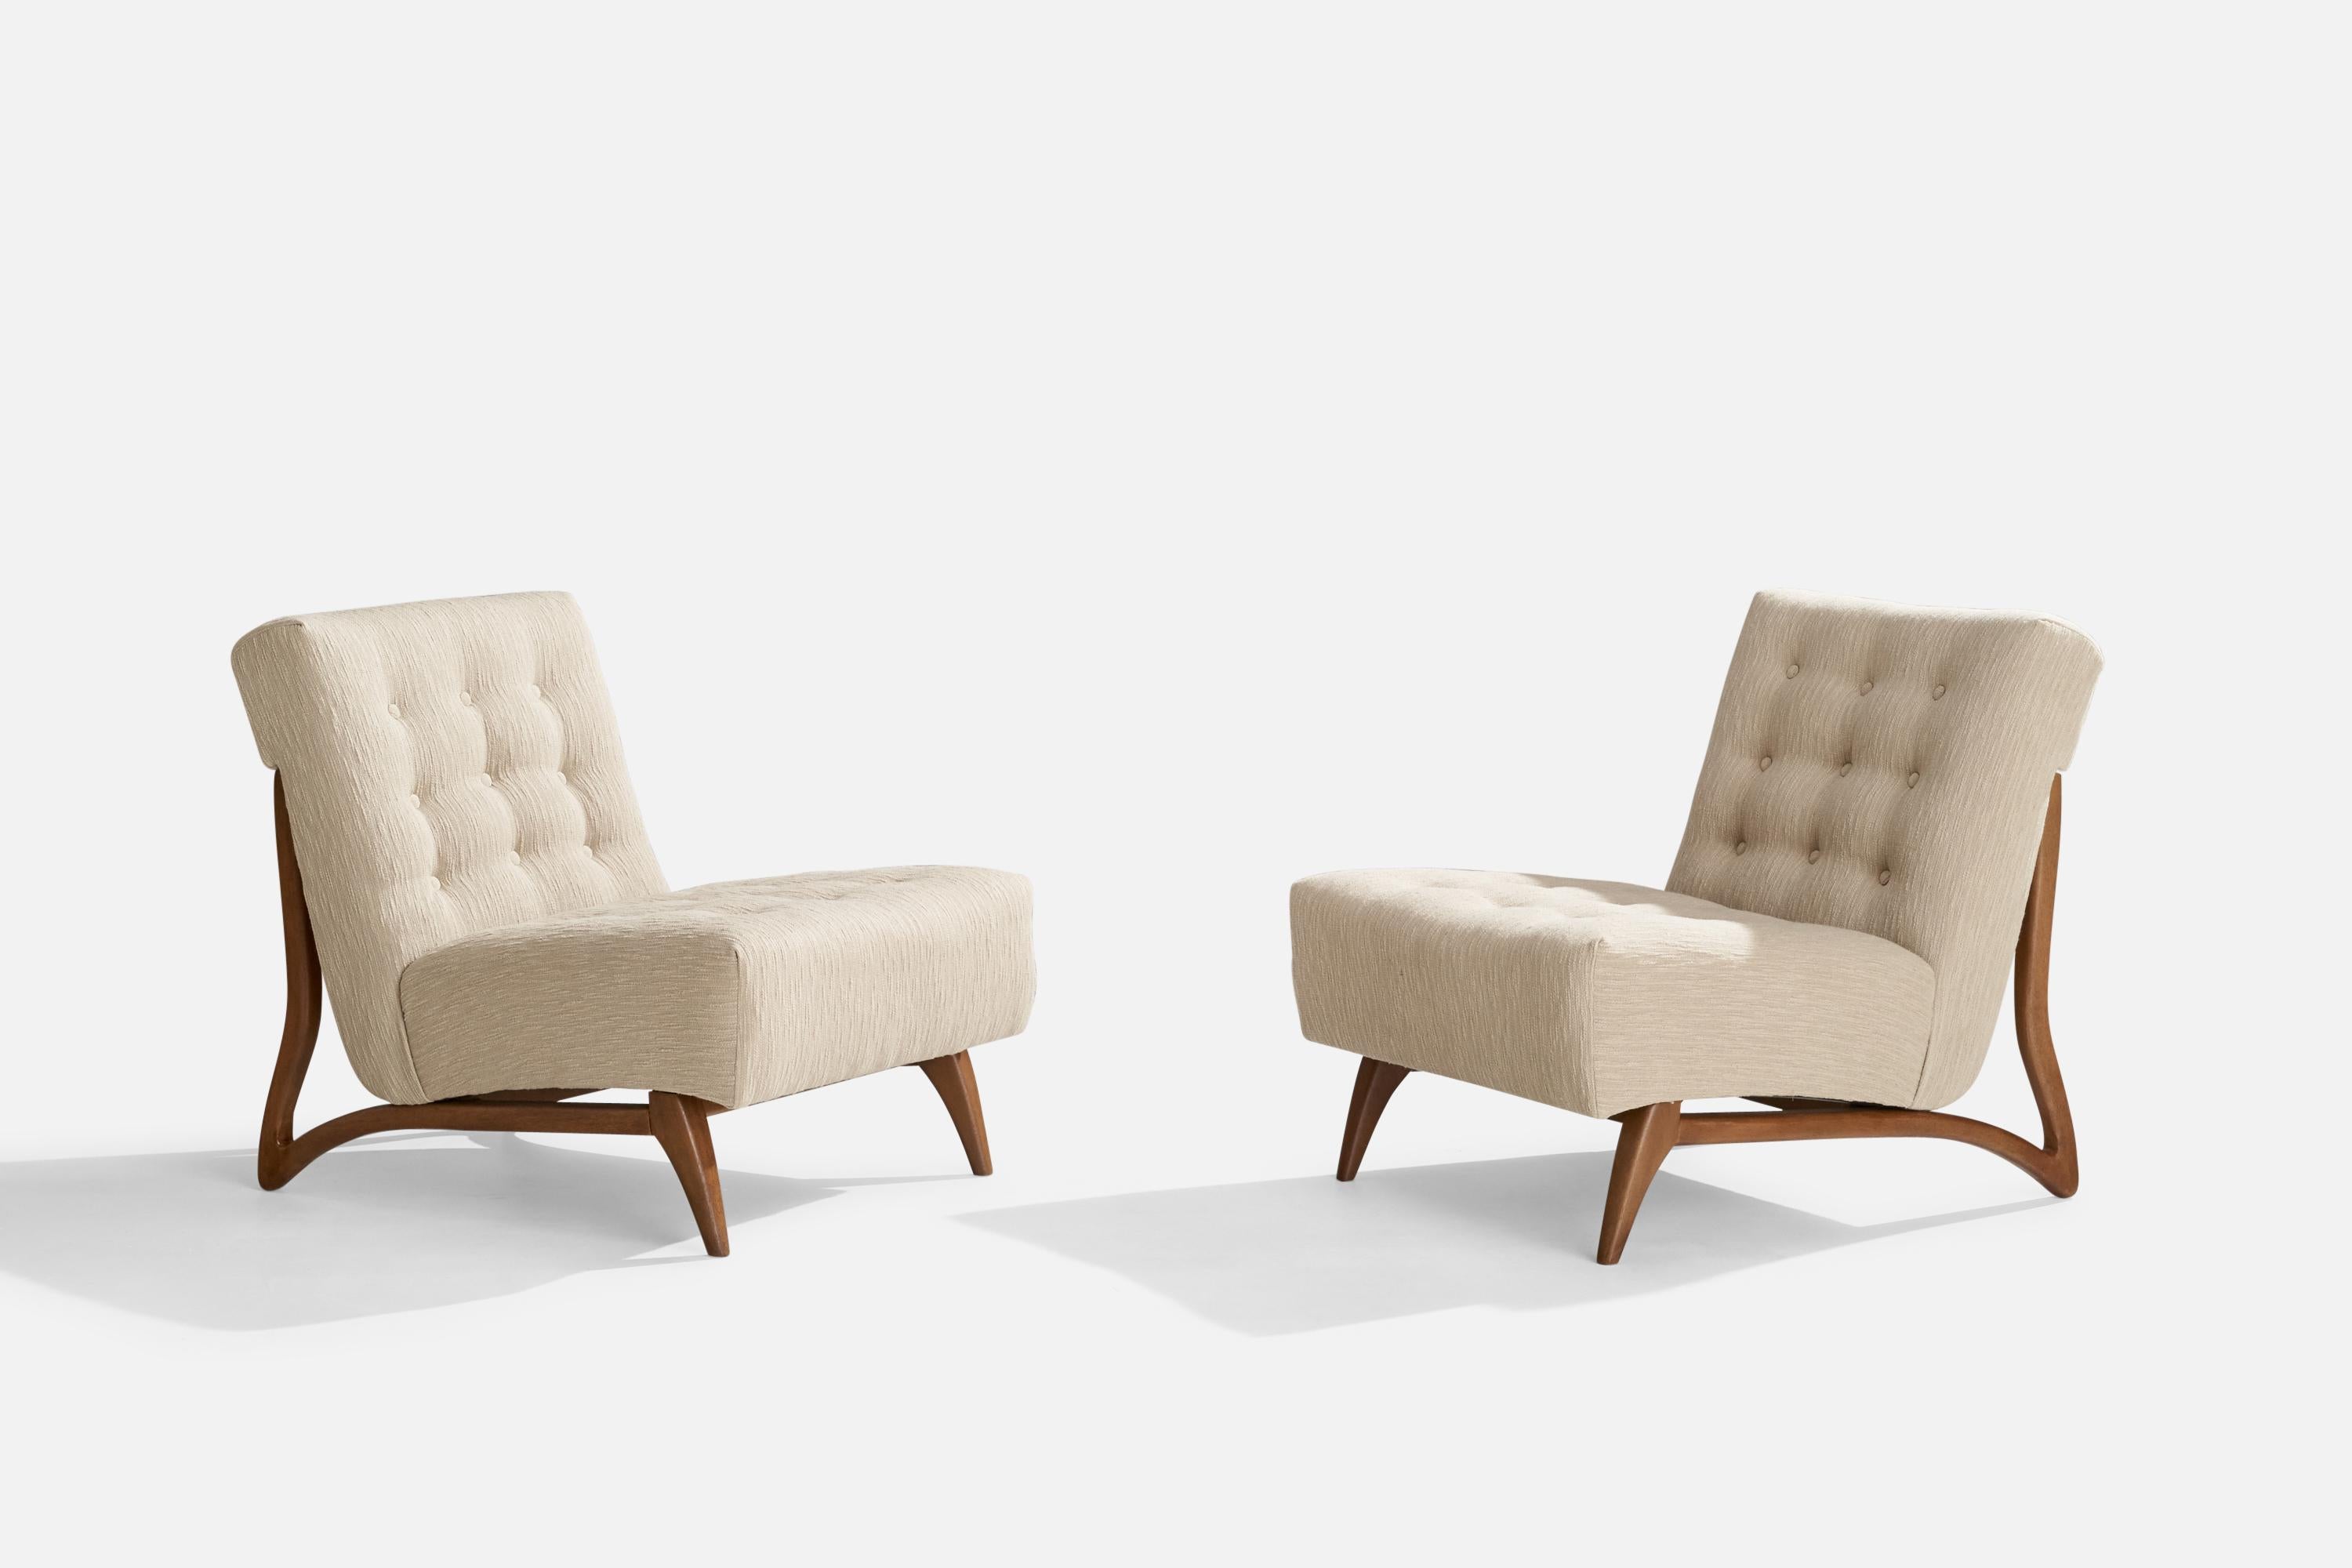 A pair of white fabric and walnut slipper lounge chairs designed and produced in the US, c. 1950s.

Seat height: 16.25”